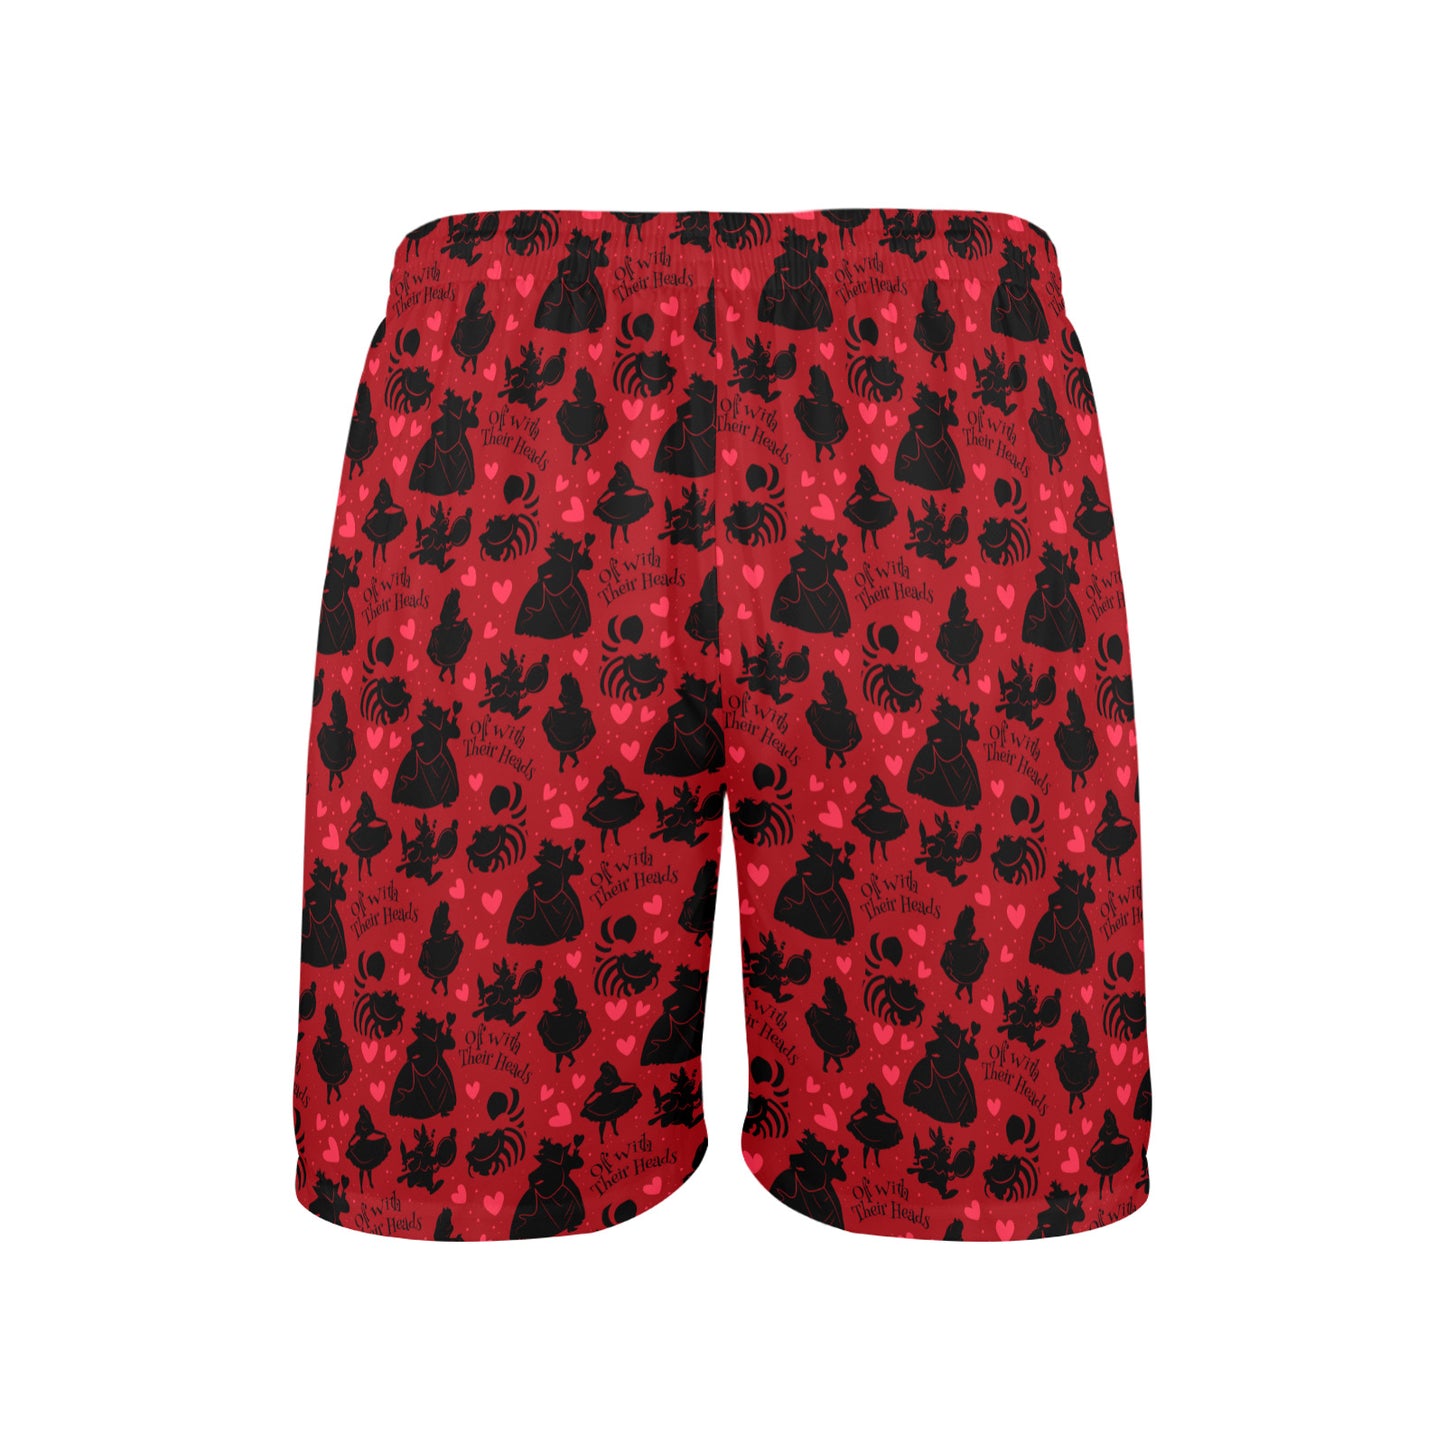 Off With Their Heads Men's Swim Trunks Swimsuit